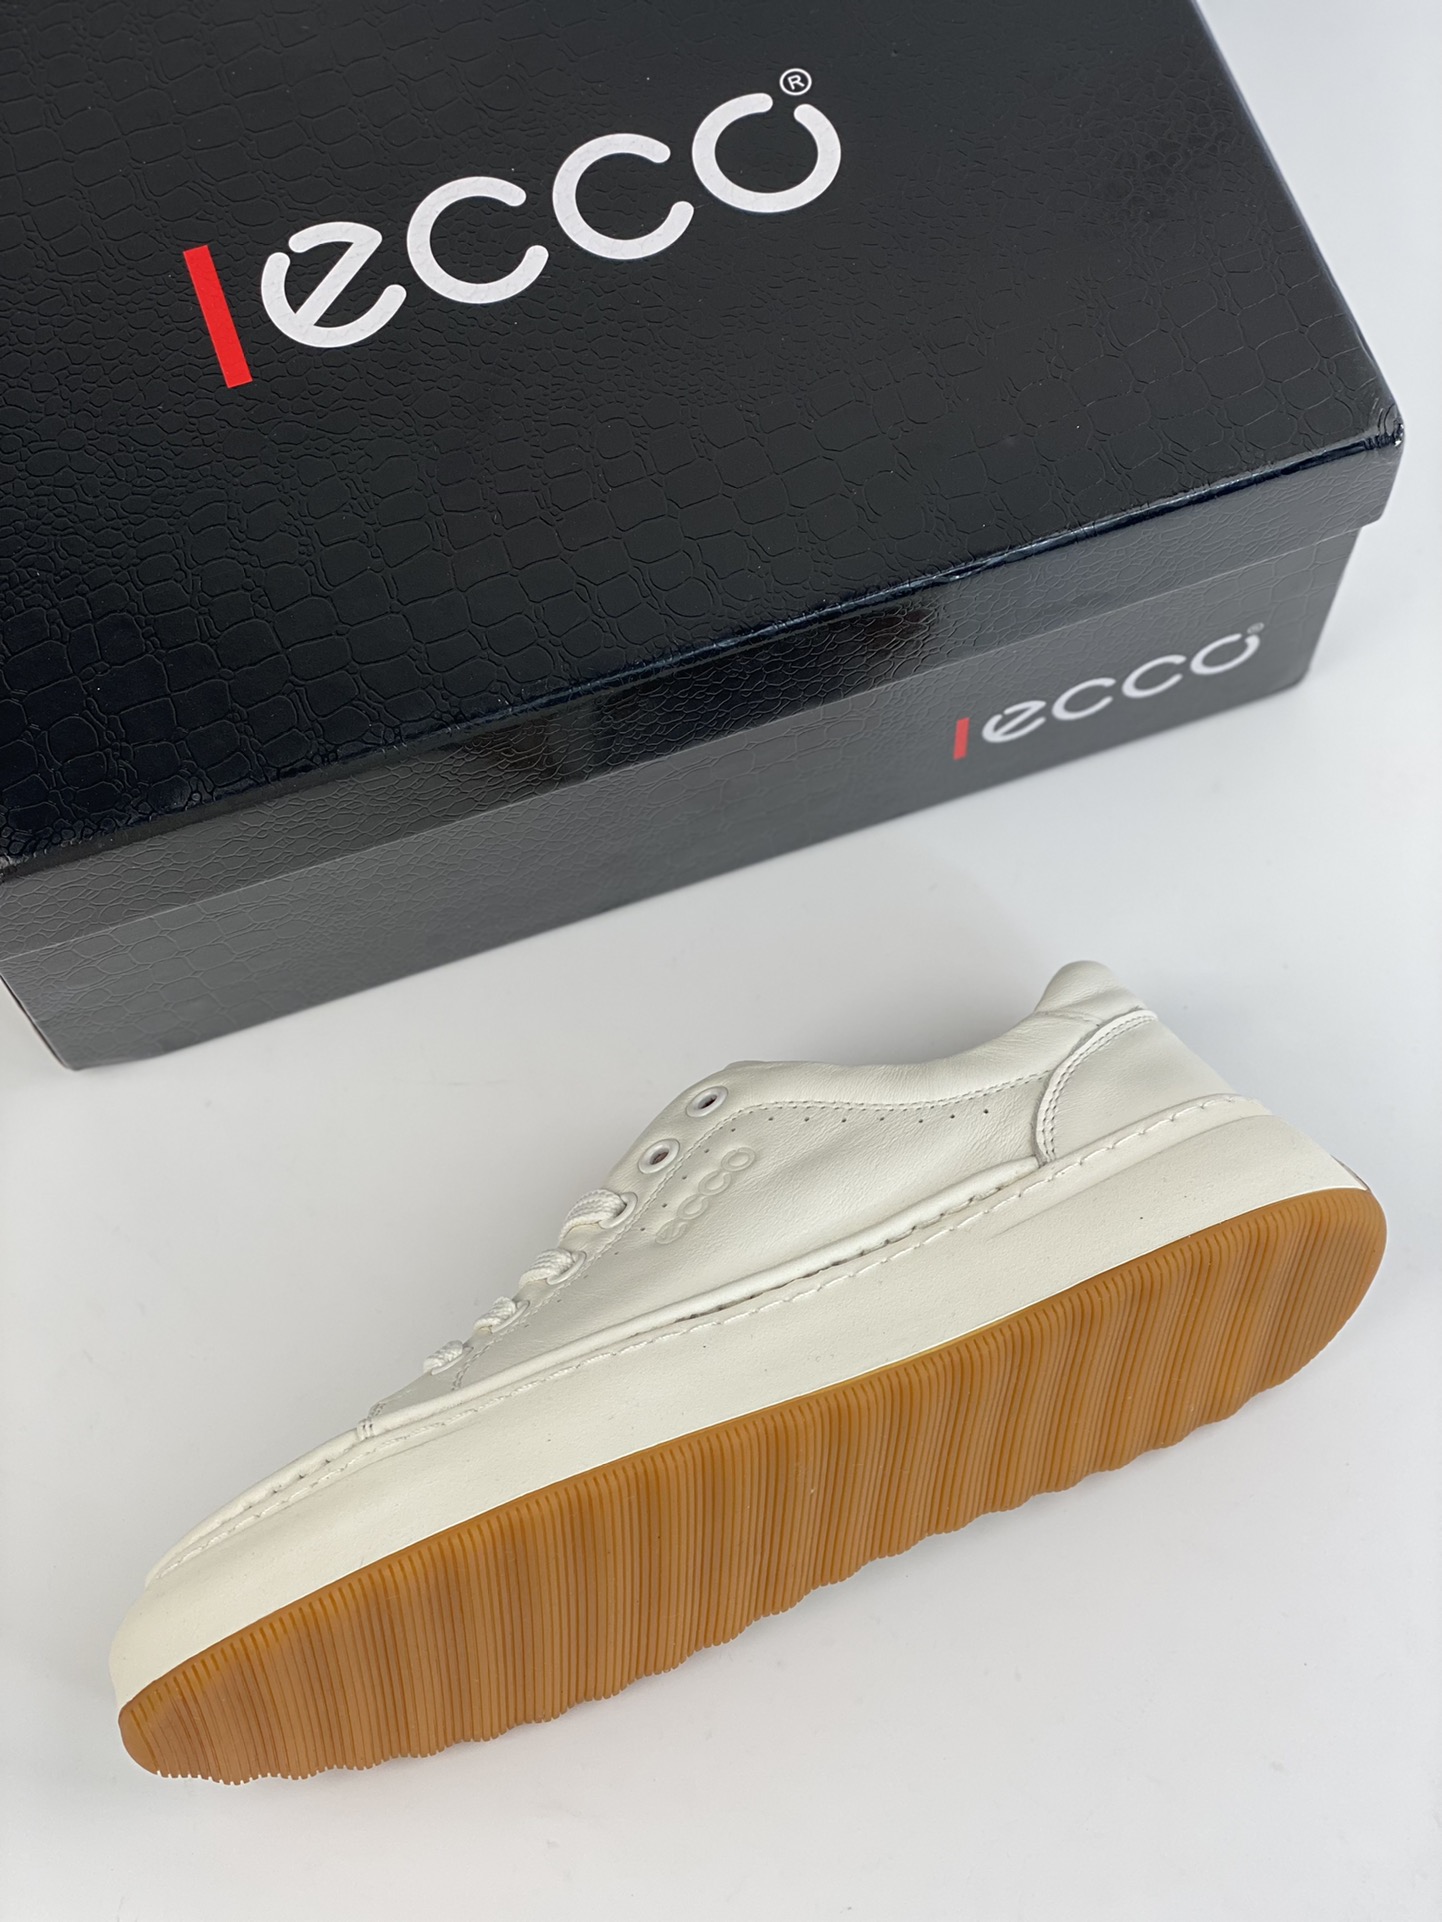 ECCO/ECCO sports running shoes/casual shoes quality